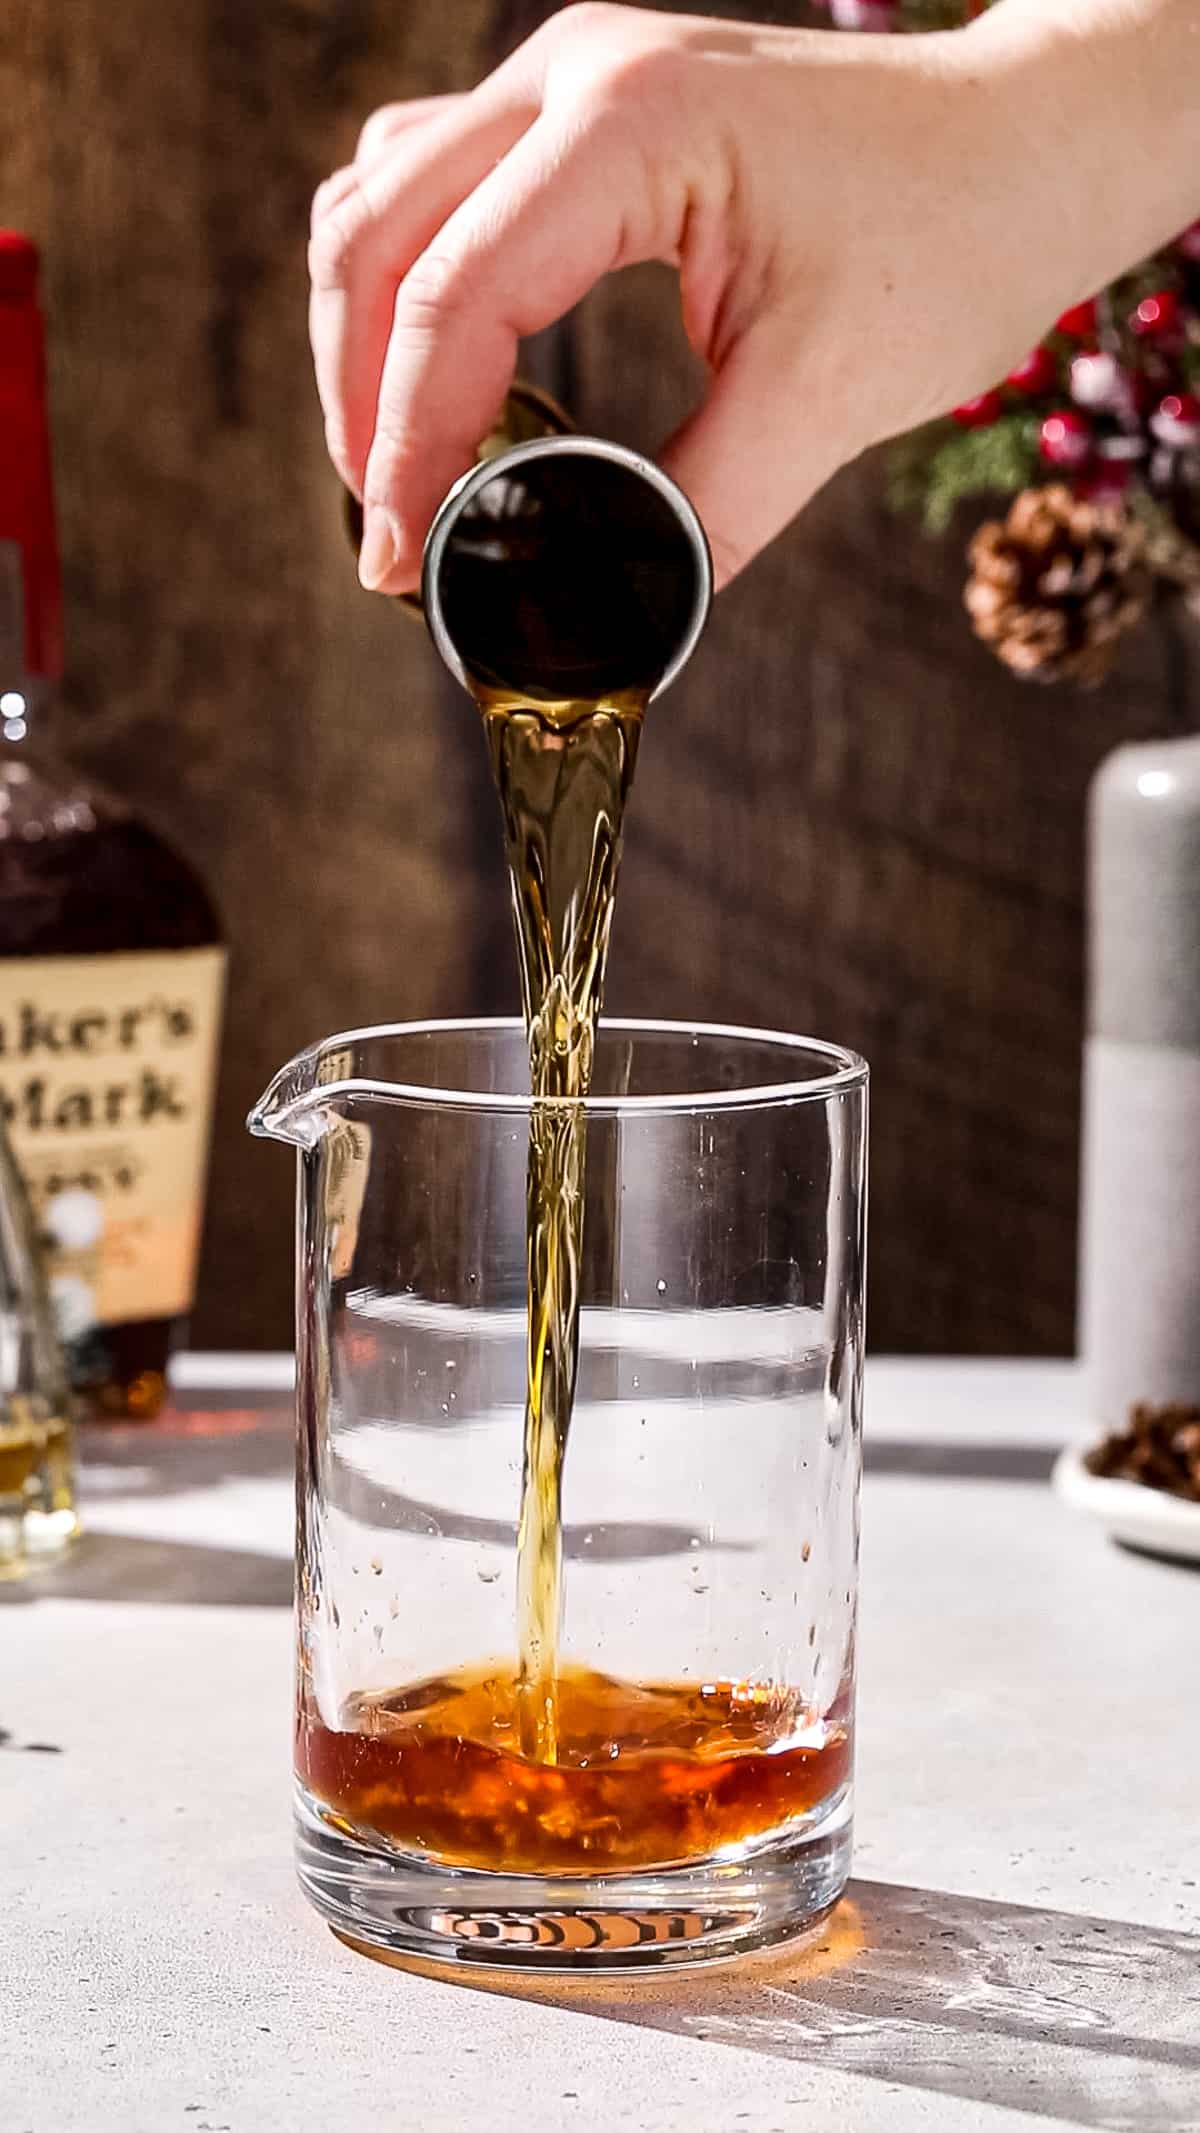 Hand using a gold jigger to add bourbon to a cocktail mixing glass.